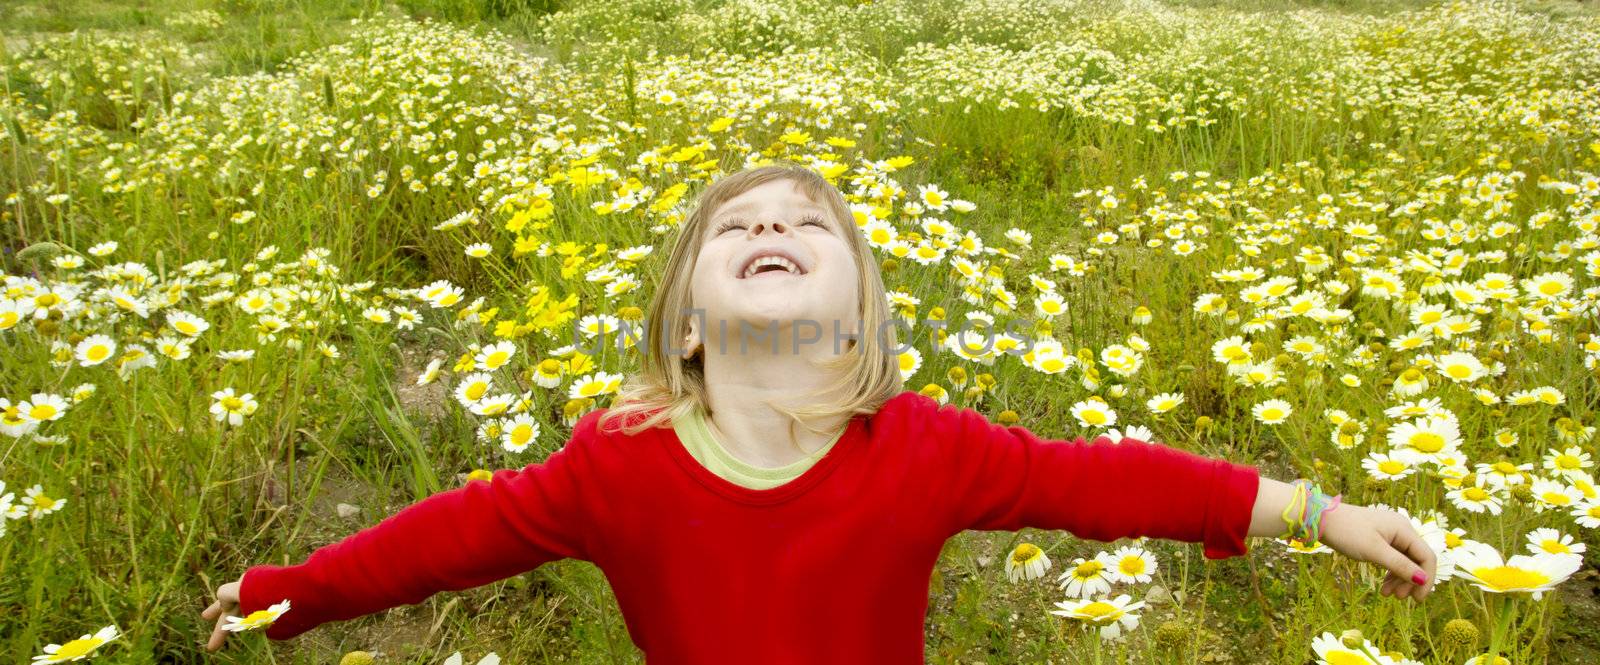 blond girl open arms spring meadow daisy flowers by lunamarina